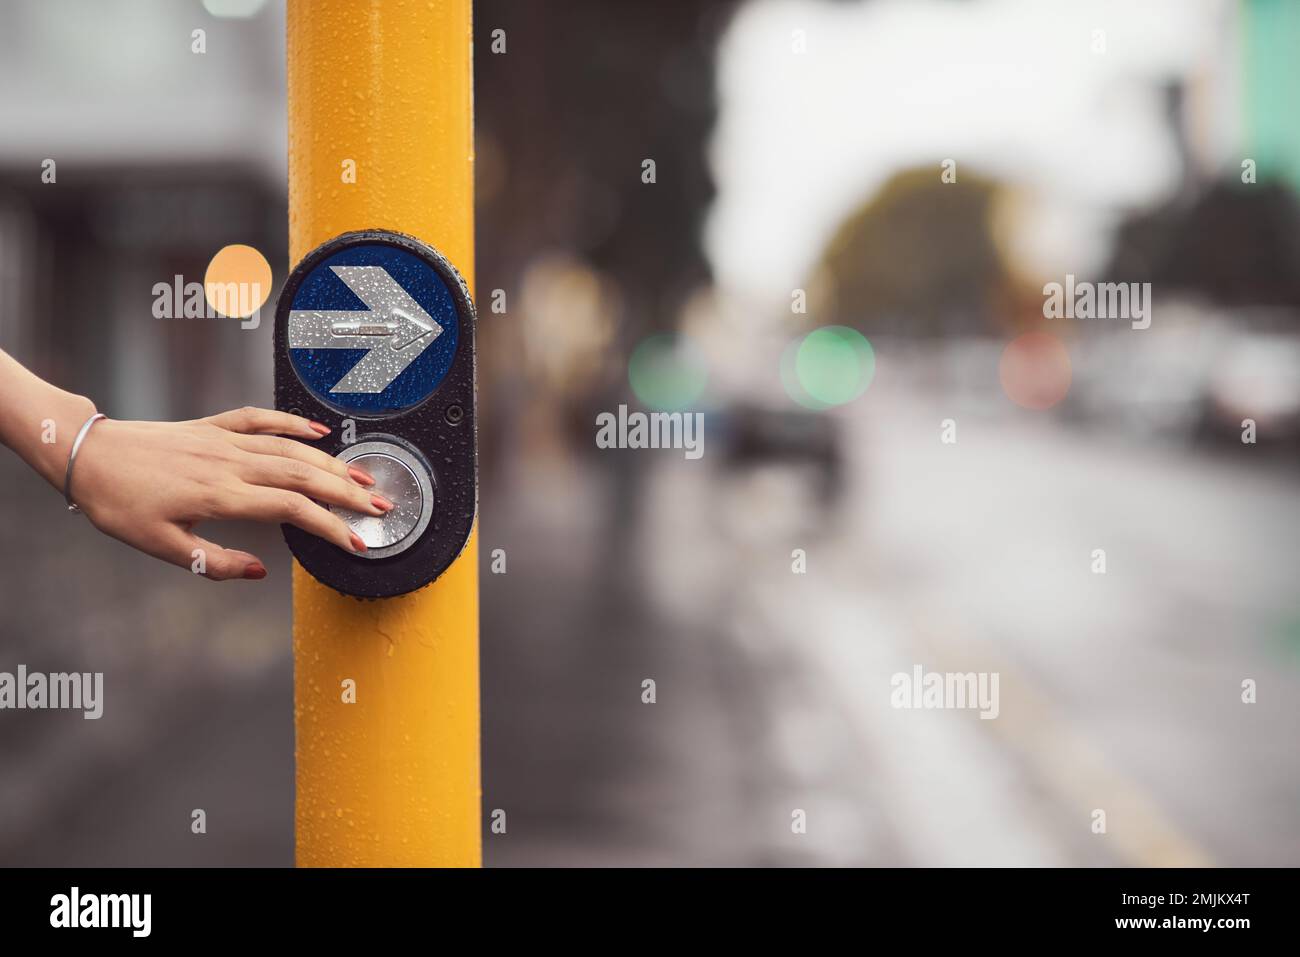 Crossing safely. Closeup shot of a woman pressing a button at a cross walk. Stock Photo